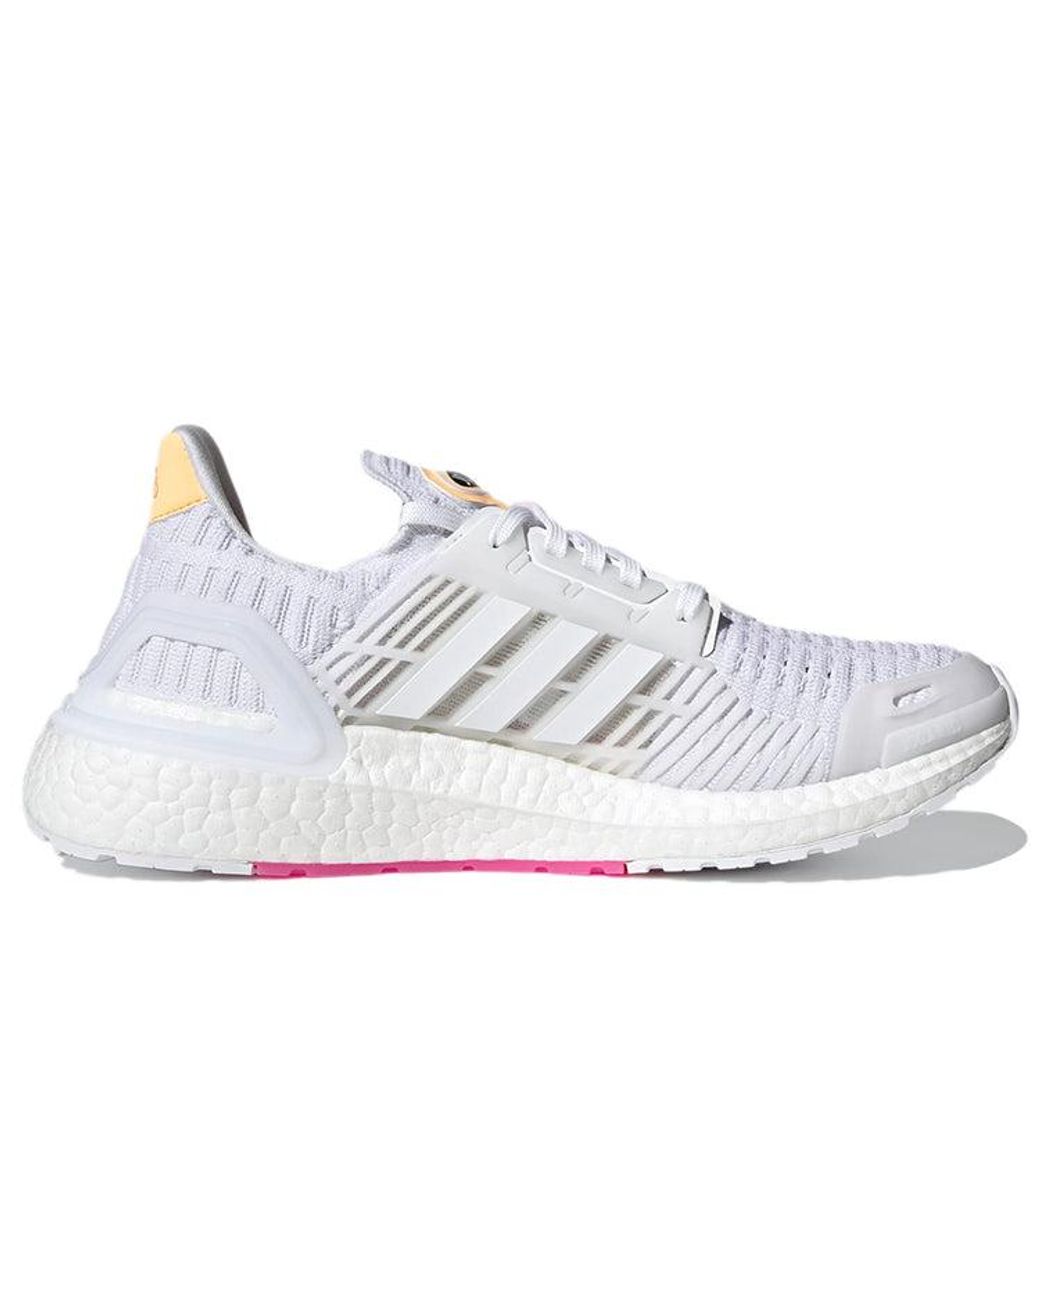 adidas Ultraboost Dna_cc1 in White | Lyst